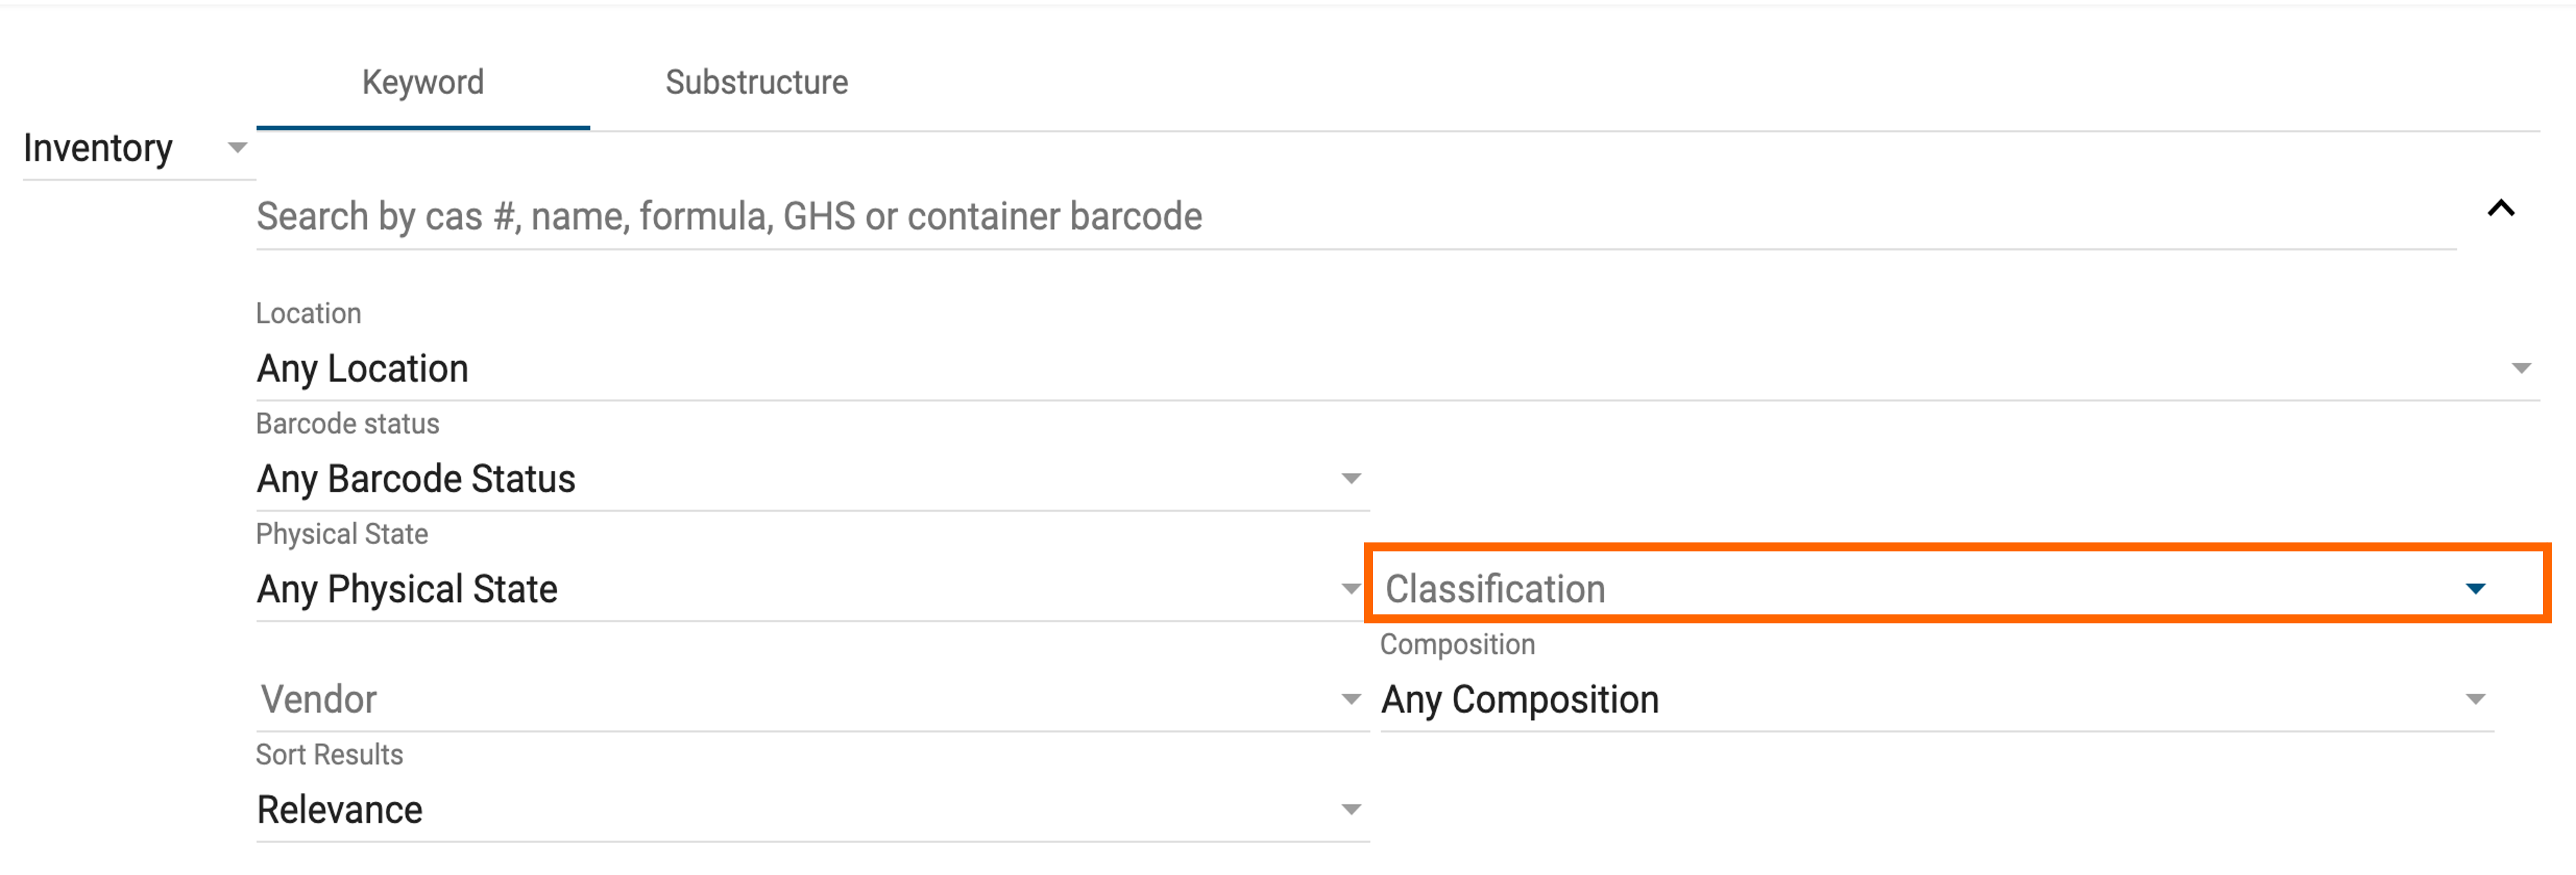 Classification and dropdown